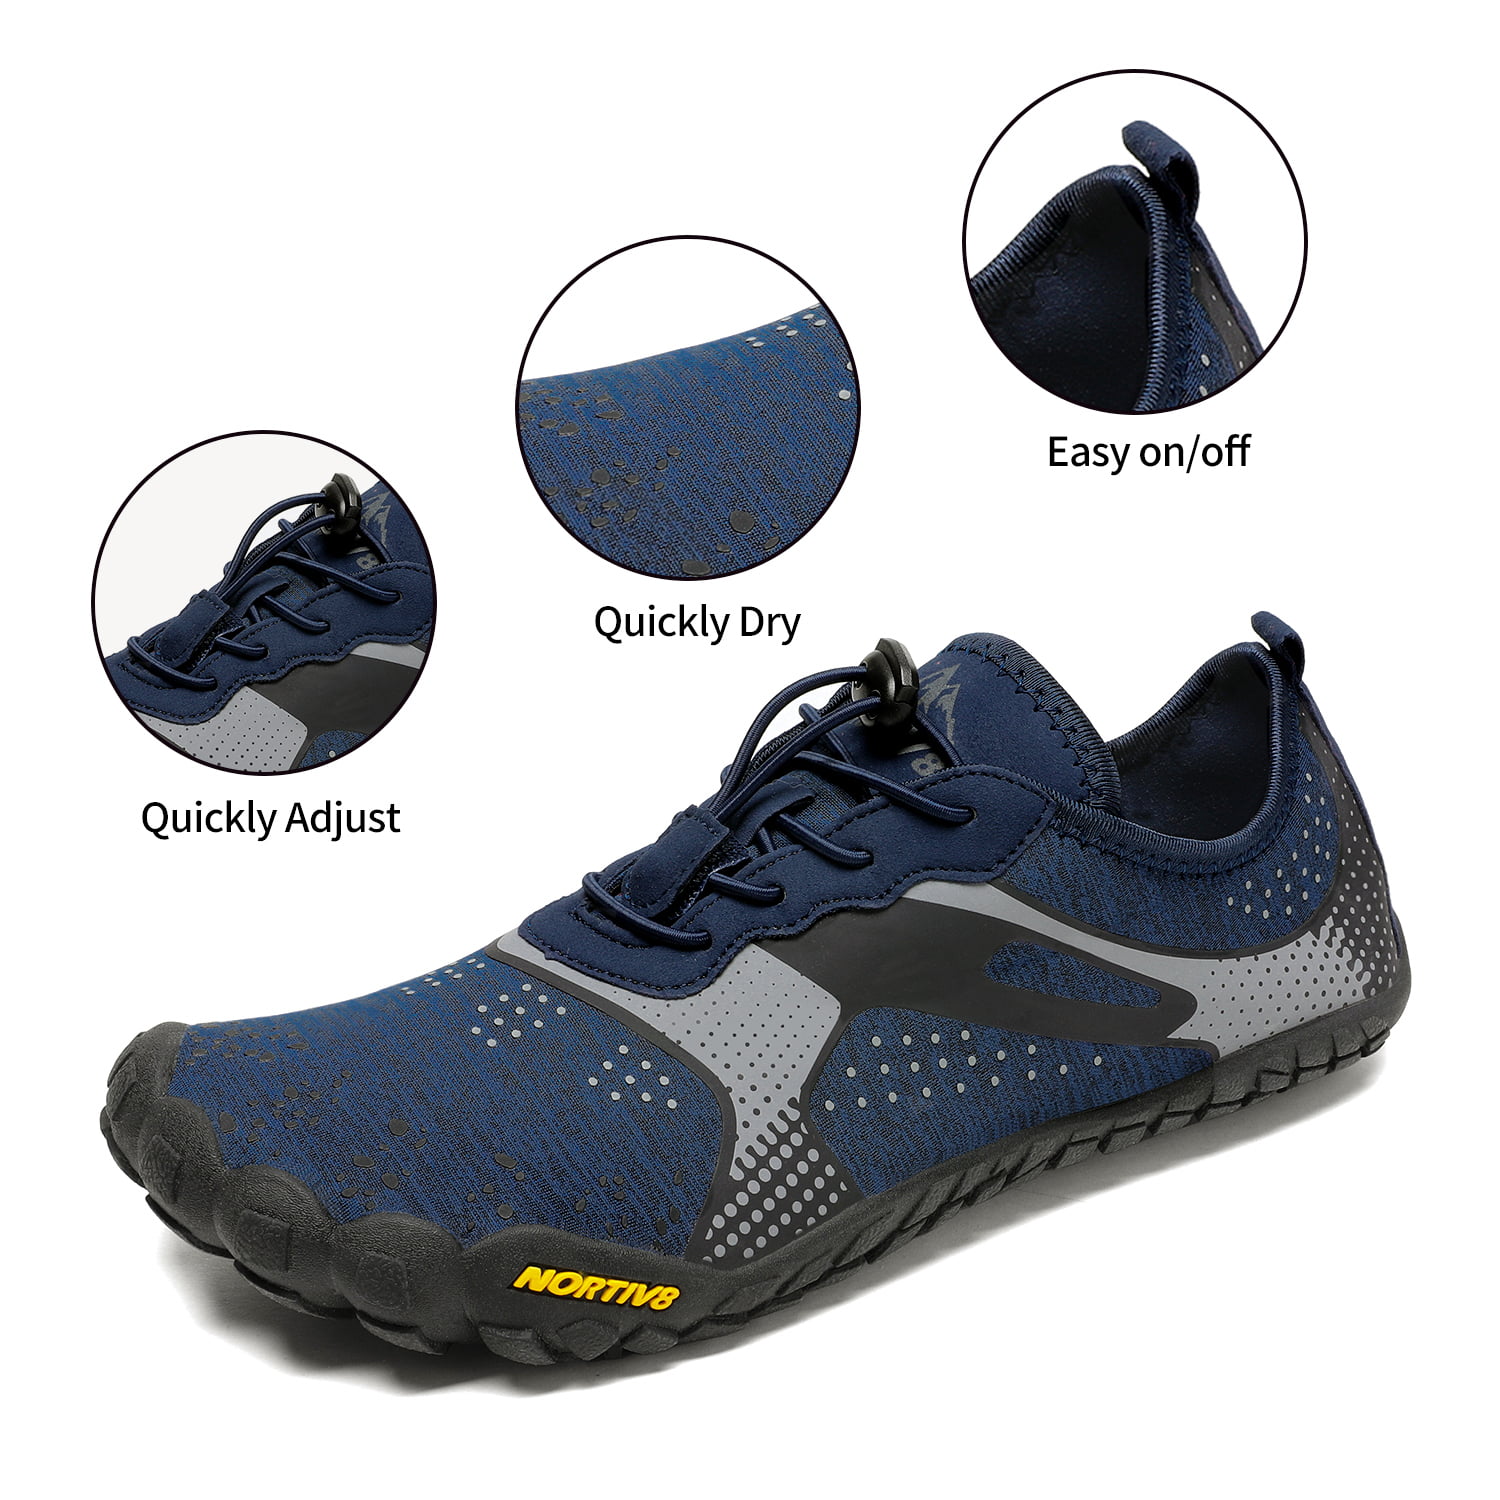 NORTIV 8 Mens Water Shoes Quick Dry Beach Barefoot Aqua Shoes 